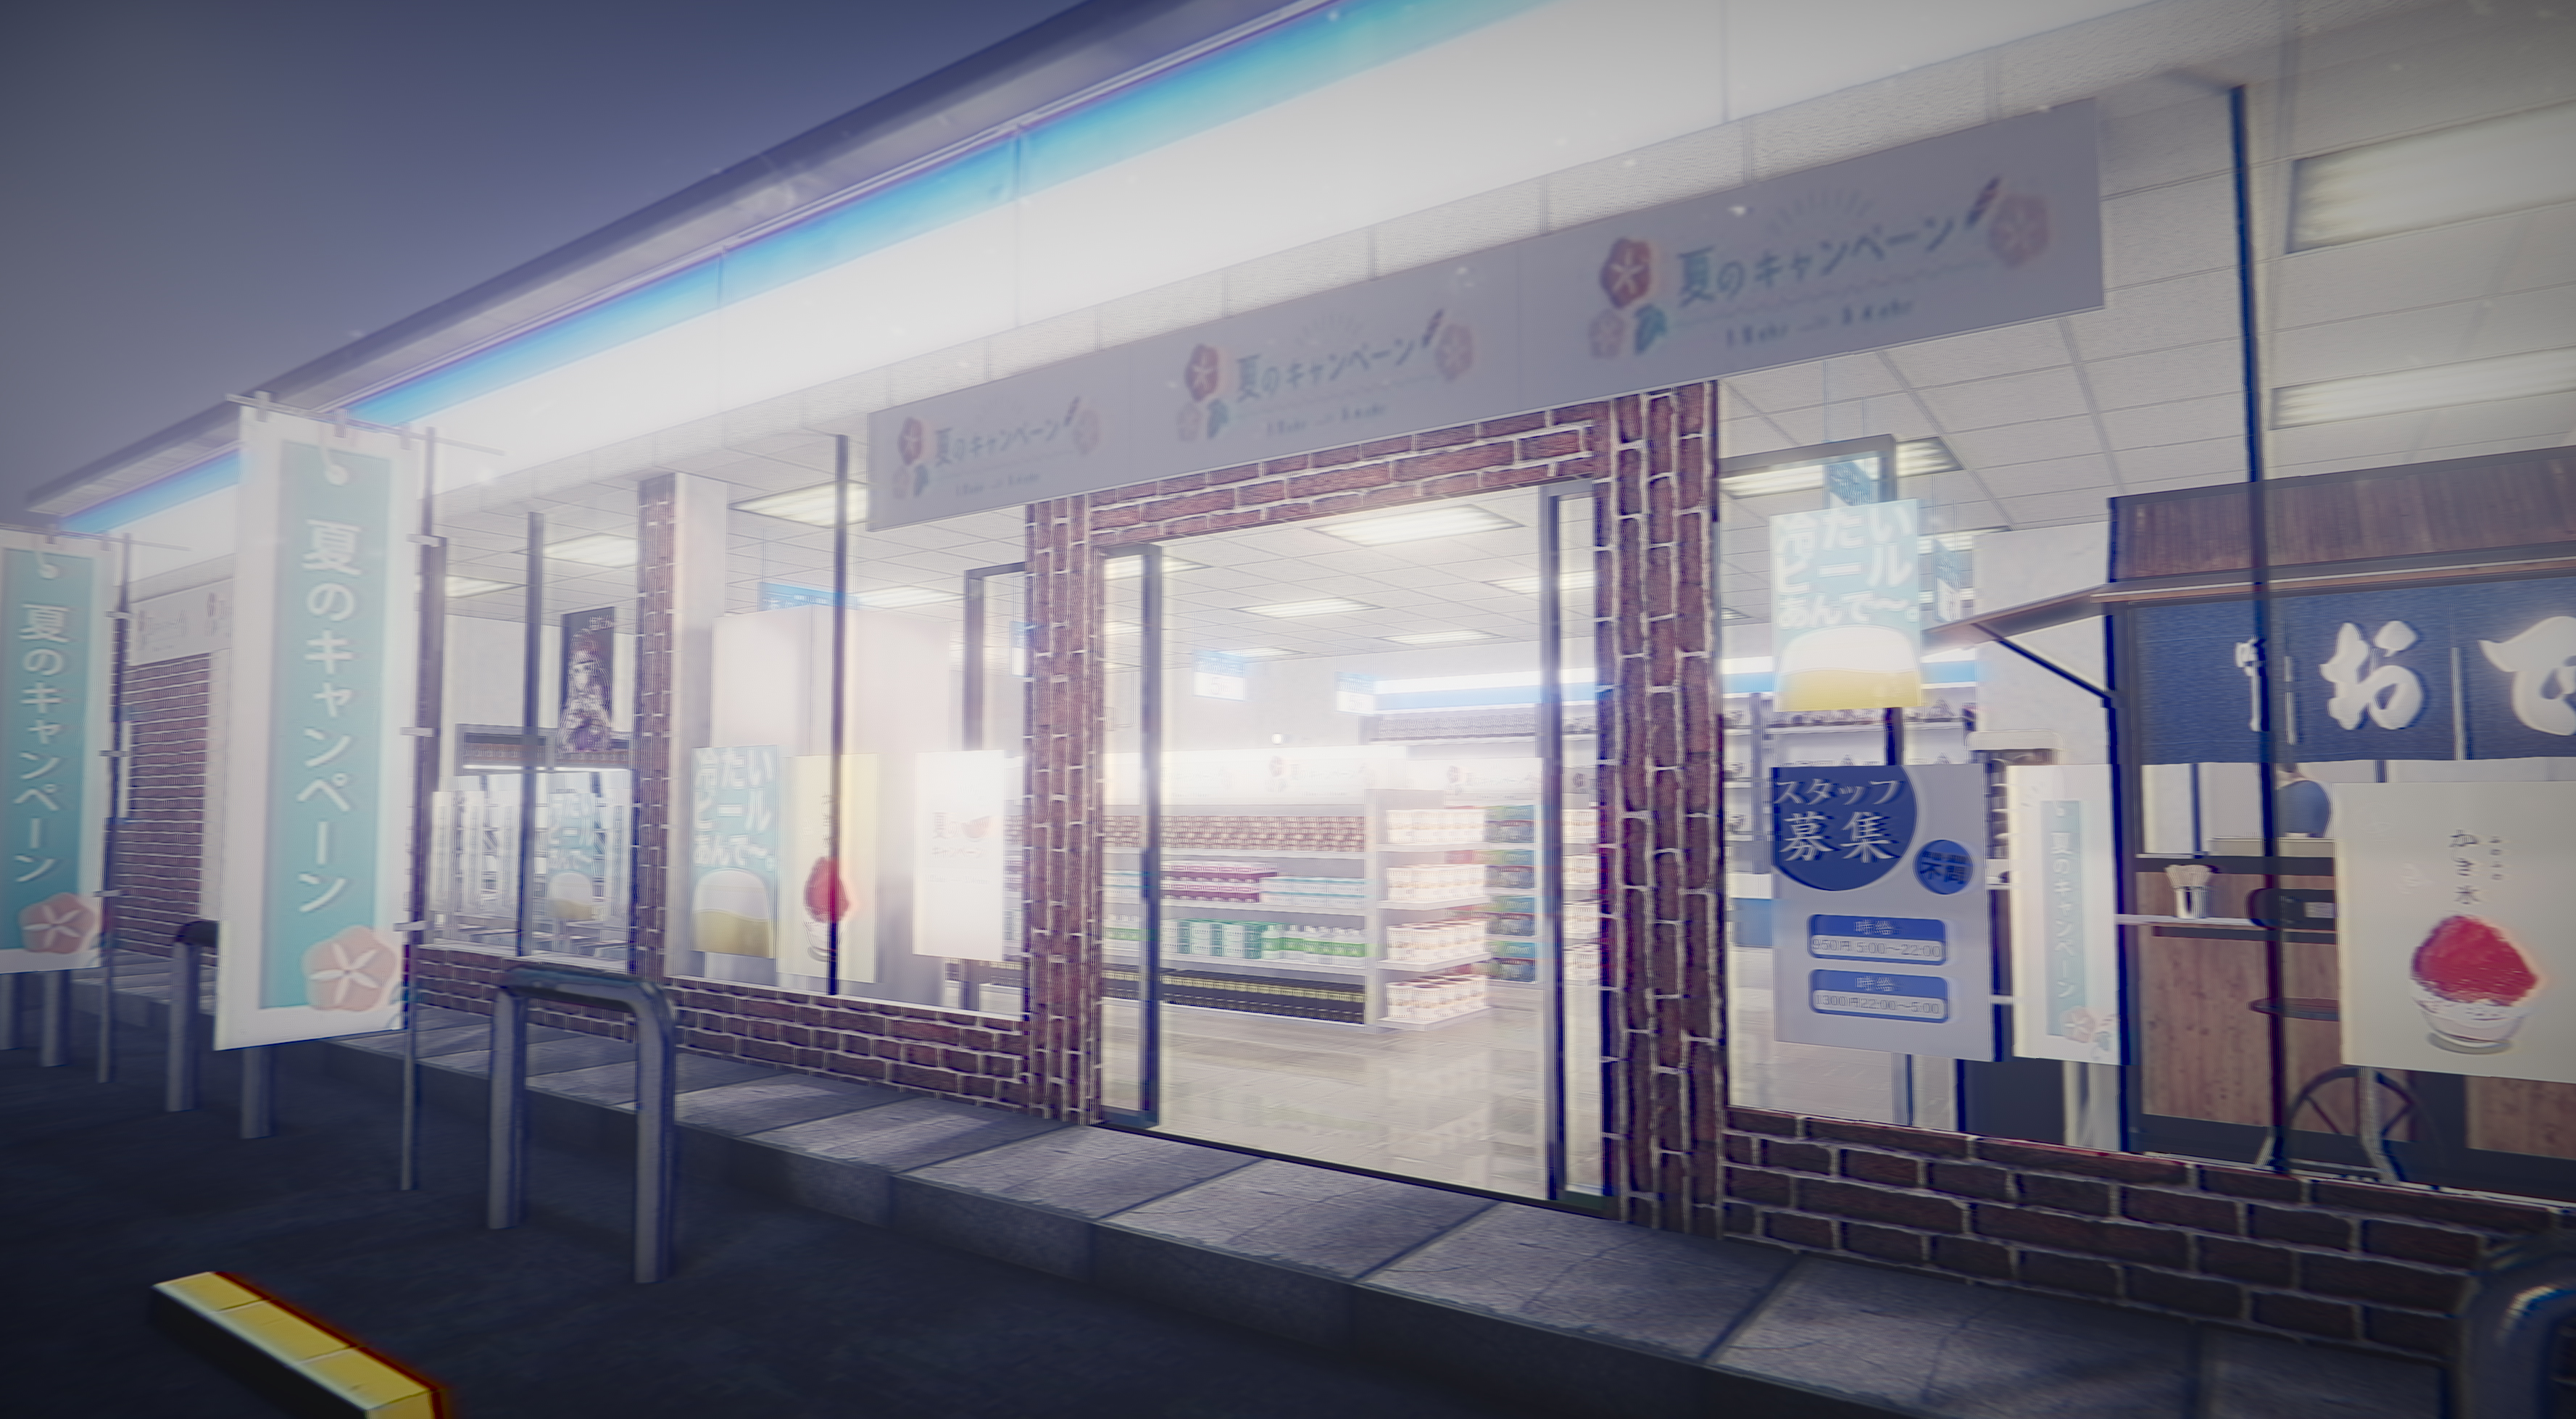  This $2 Japanese horror game about a haunted convenience store really got under my skin 